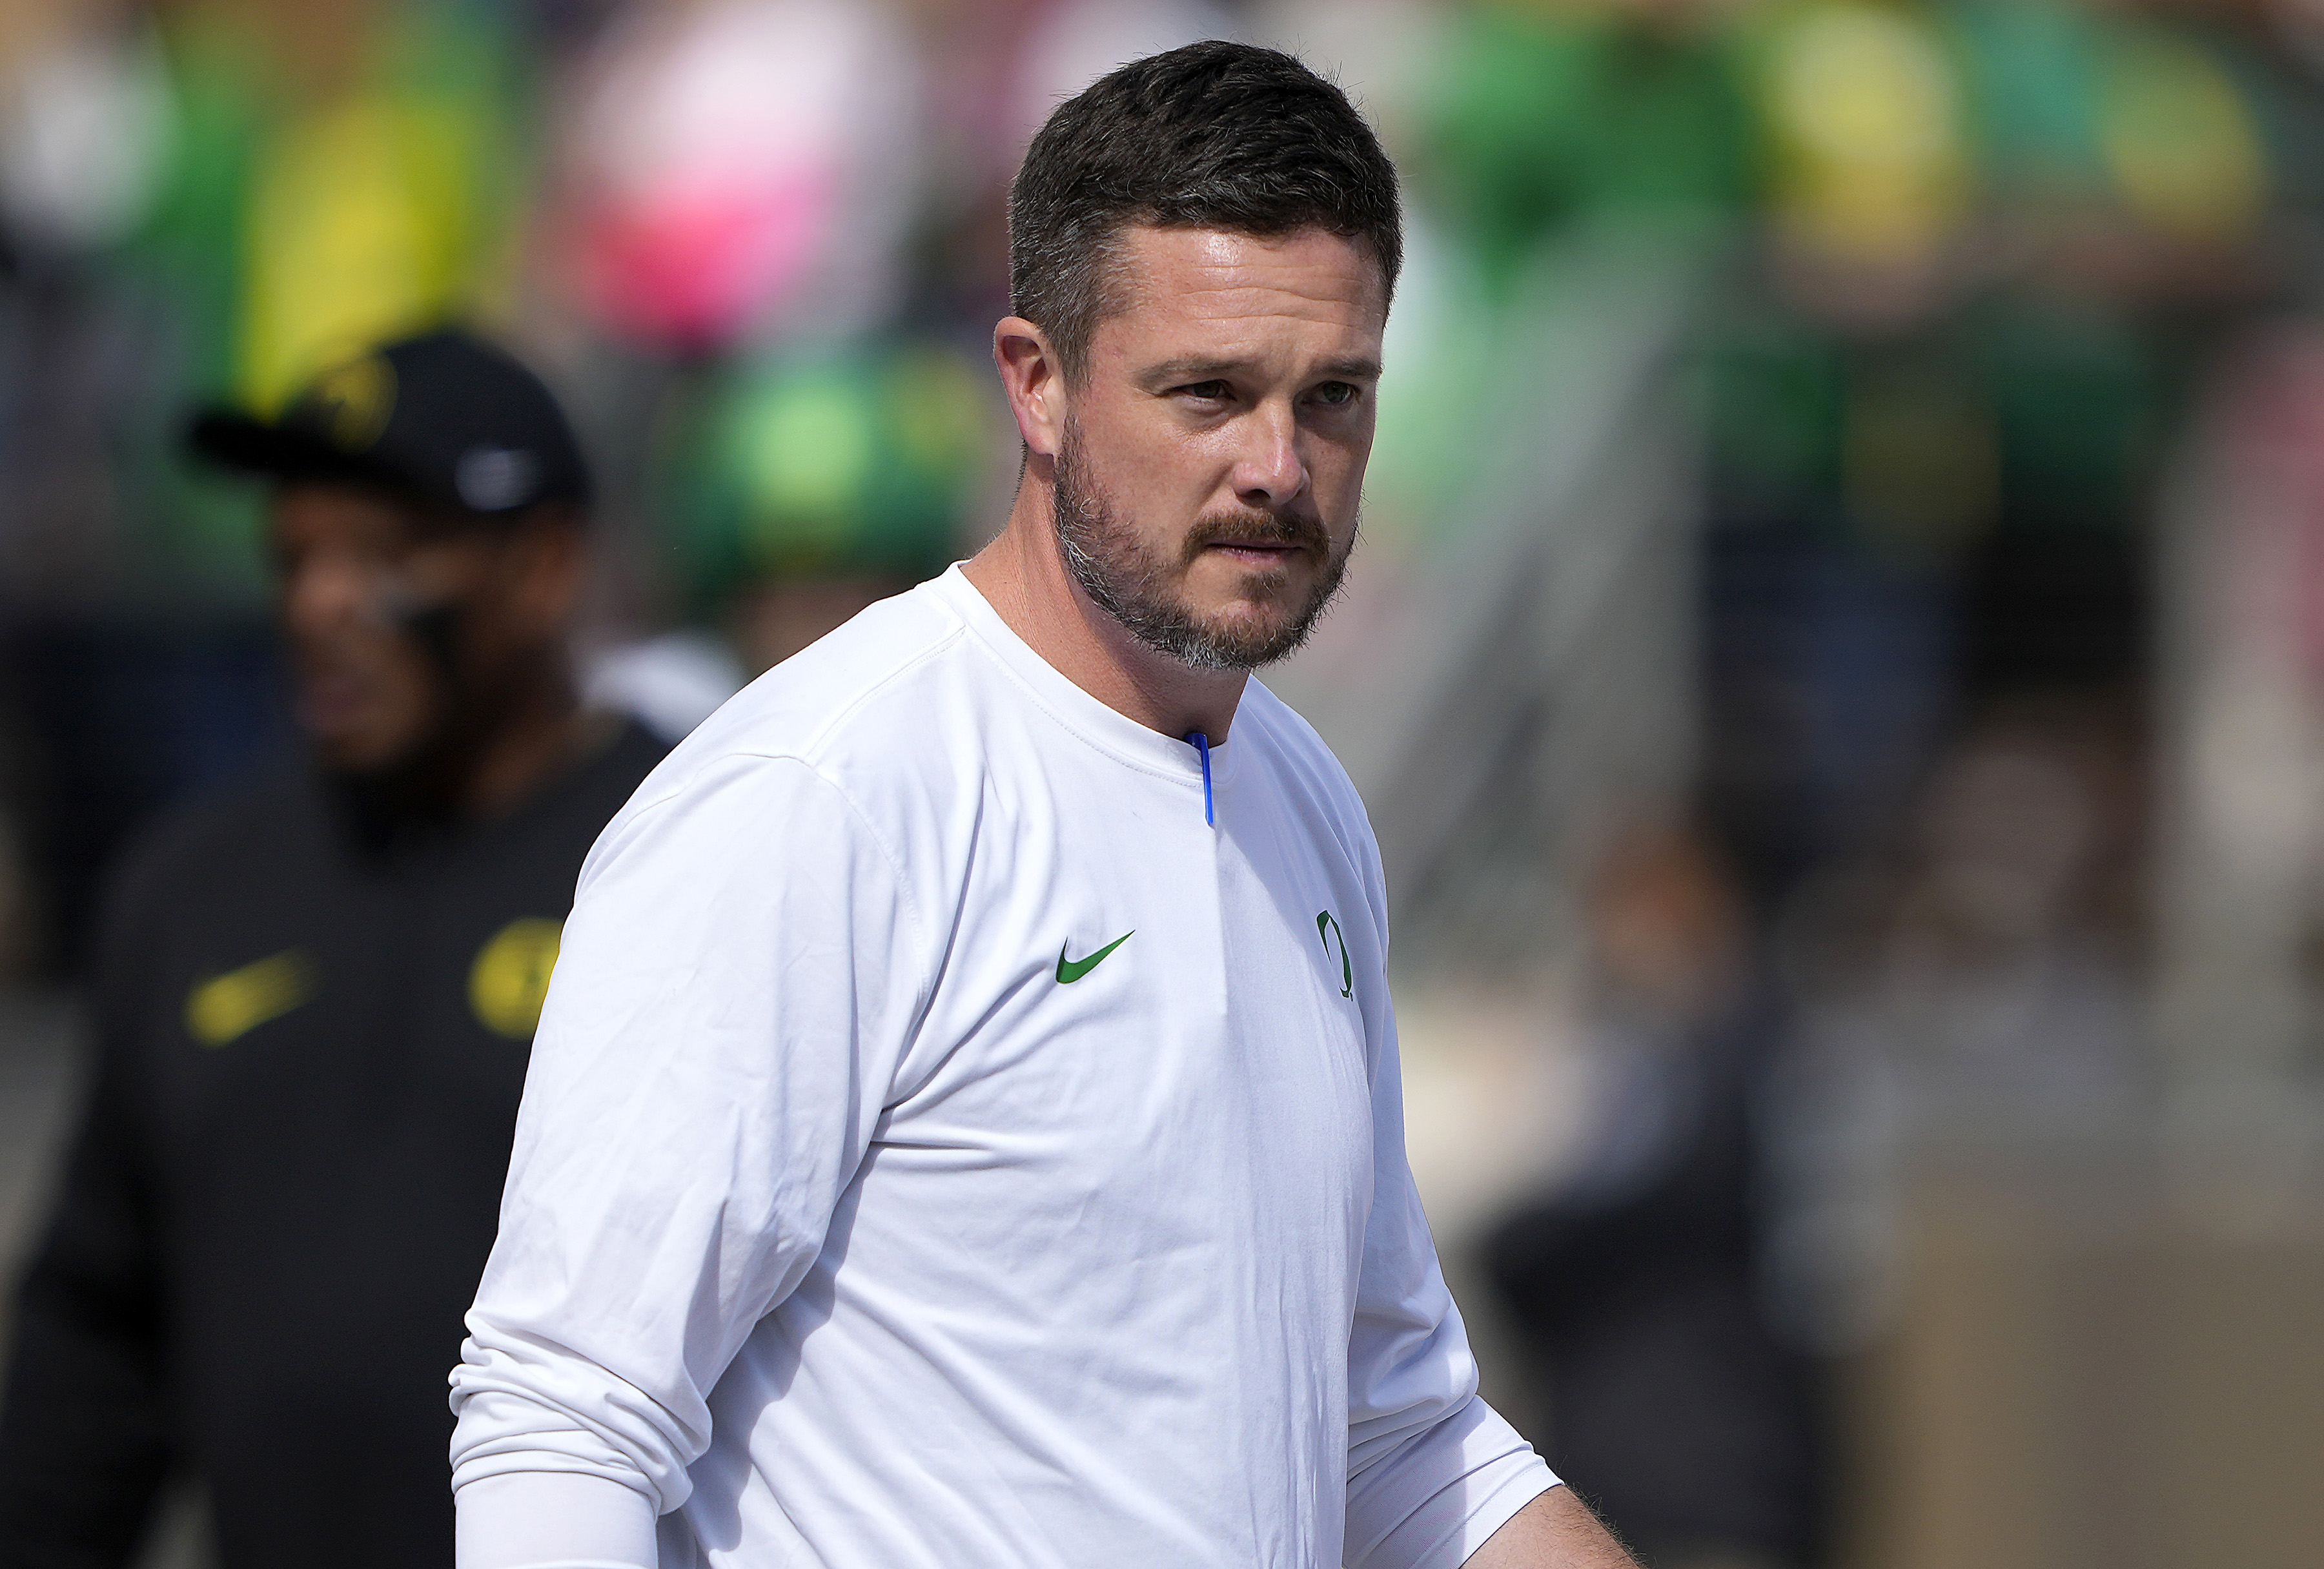 Oregon coach Dan Lanning closes postgame with extended speech on gun violence in America after Maine shooting